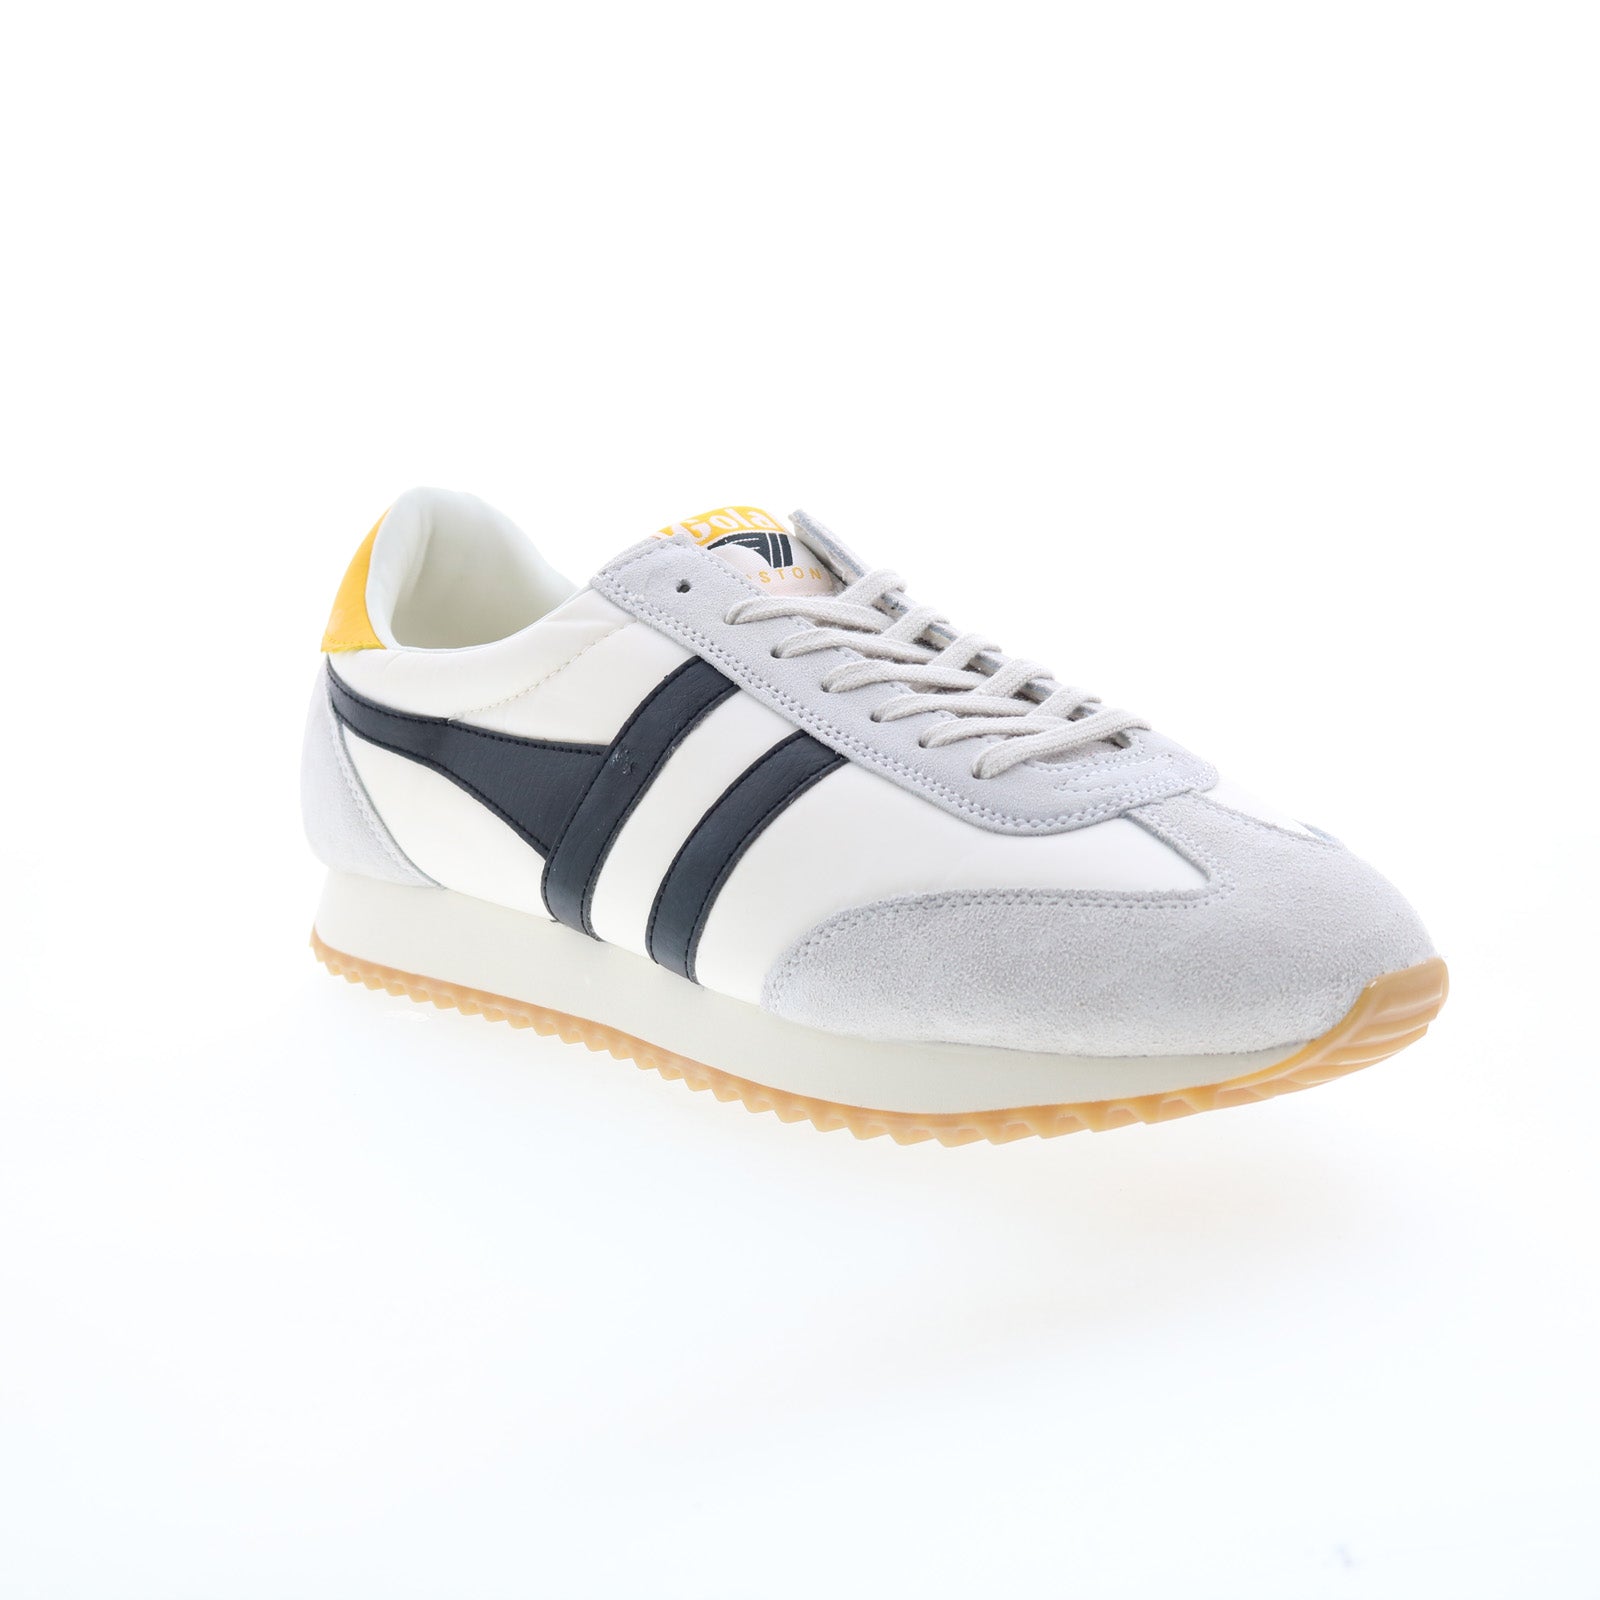 Gola Boston 78 CMB108 Mens White Canvas Lace Up Lifestyle Sneakers Shoes